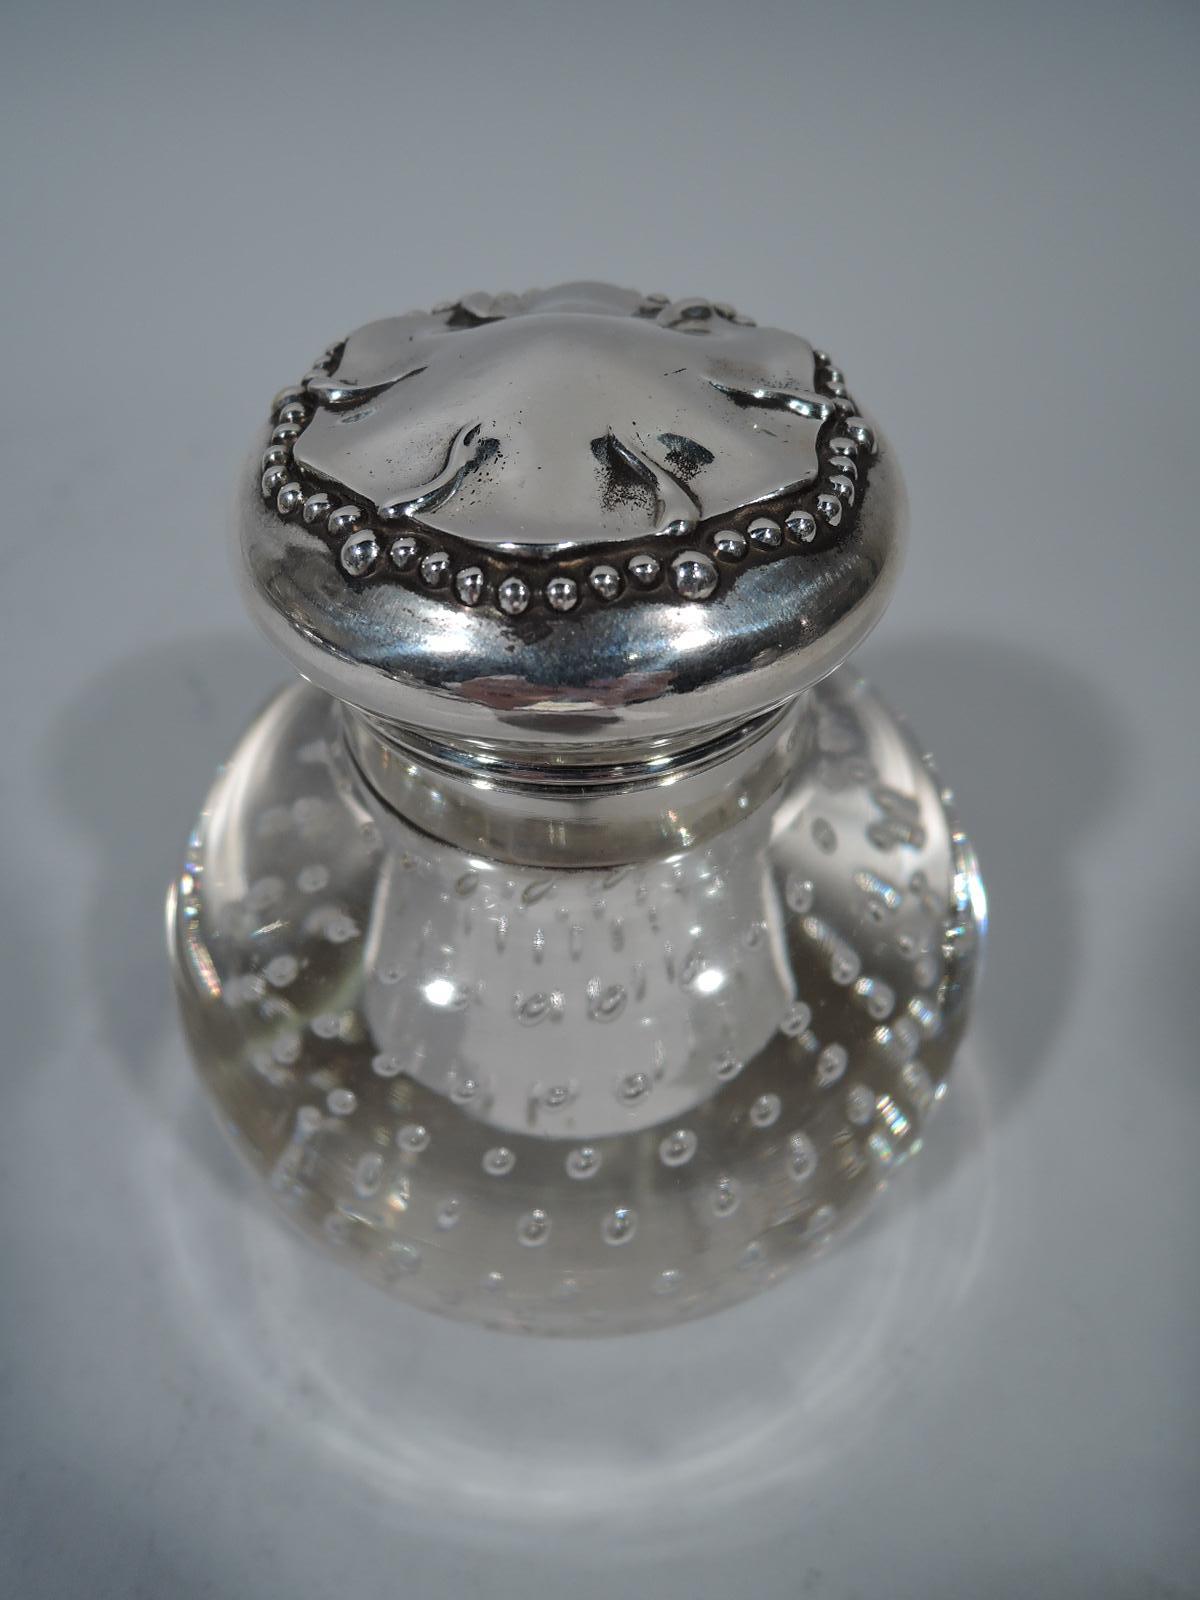 Turn-of-the-century sterling silver and pairpoint glass inkwell. Plain, round, and upward tapering well with pointed bottom set in globe with controlled bubbles. Short neck in sterling silver collar with hinged and bellied cover, also sterling